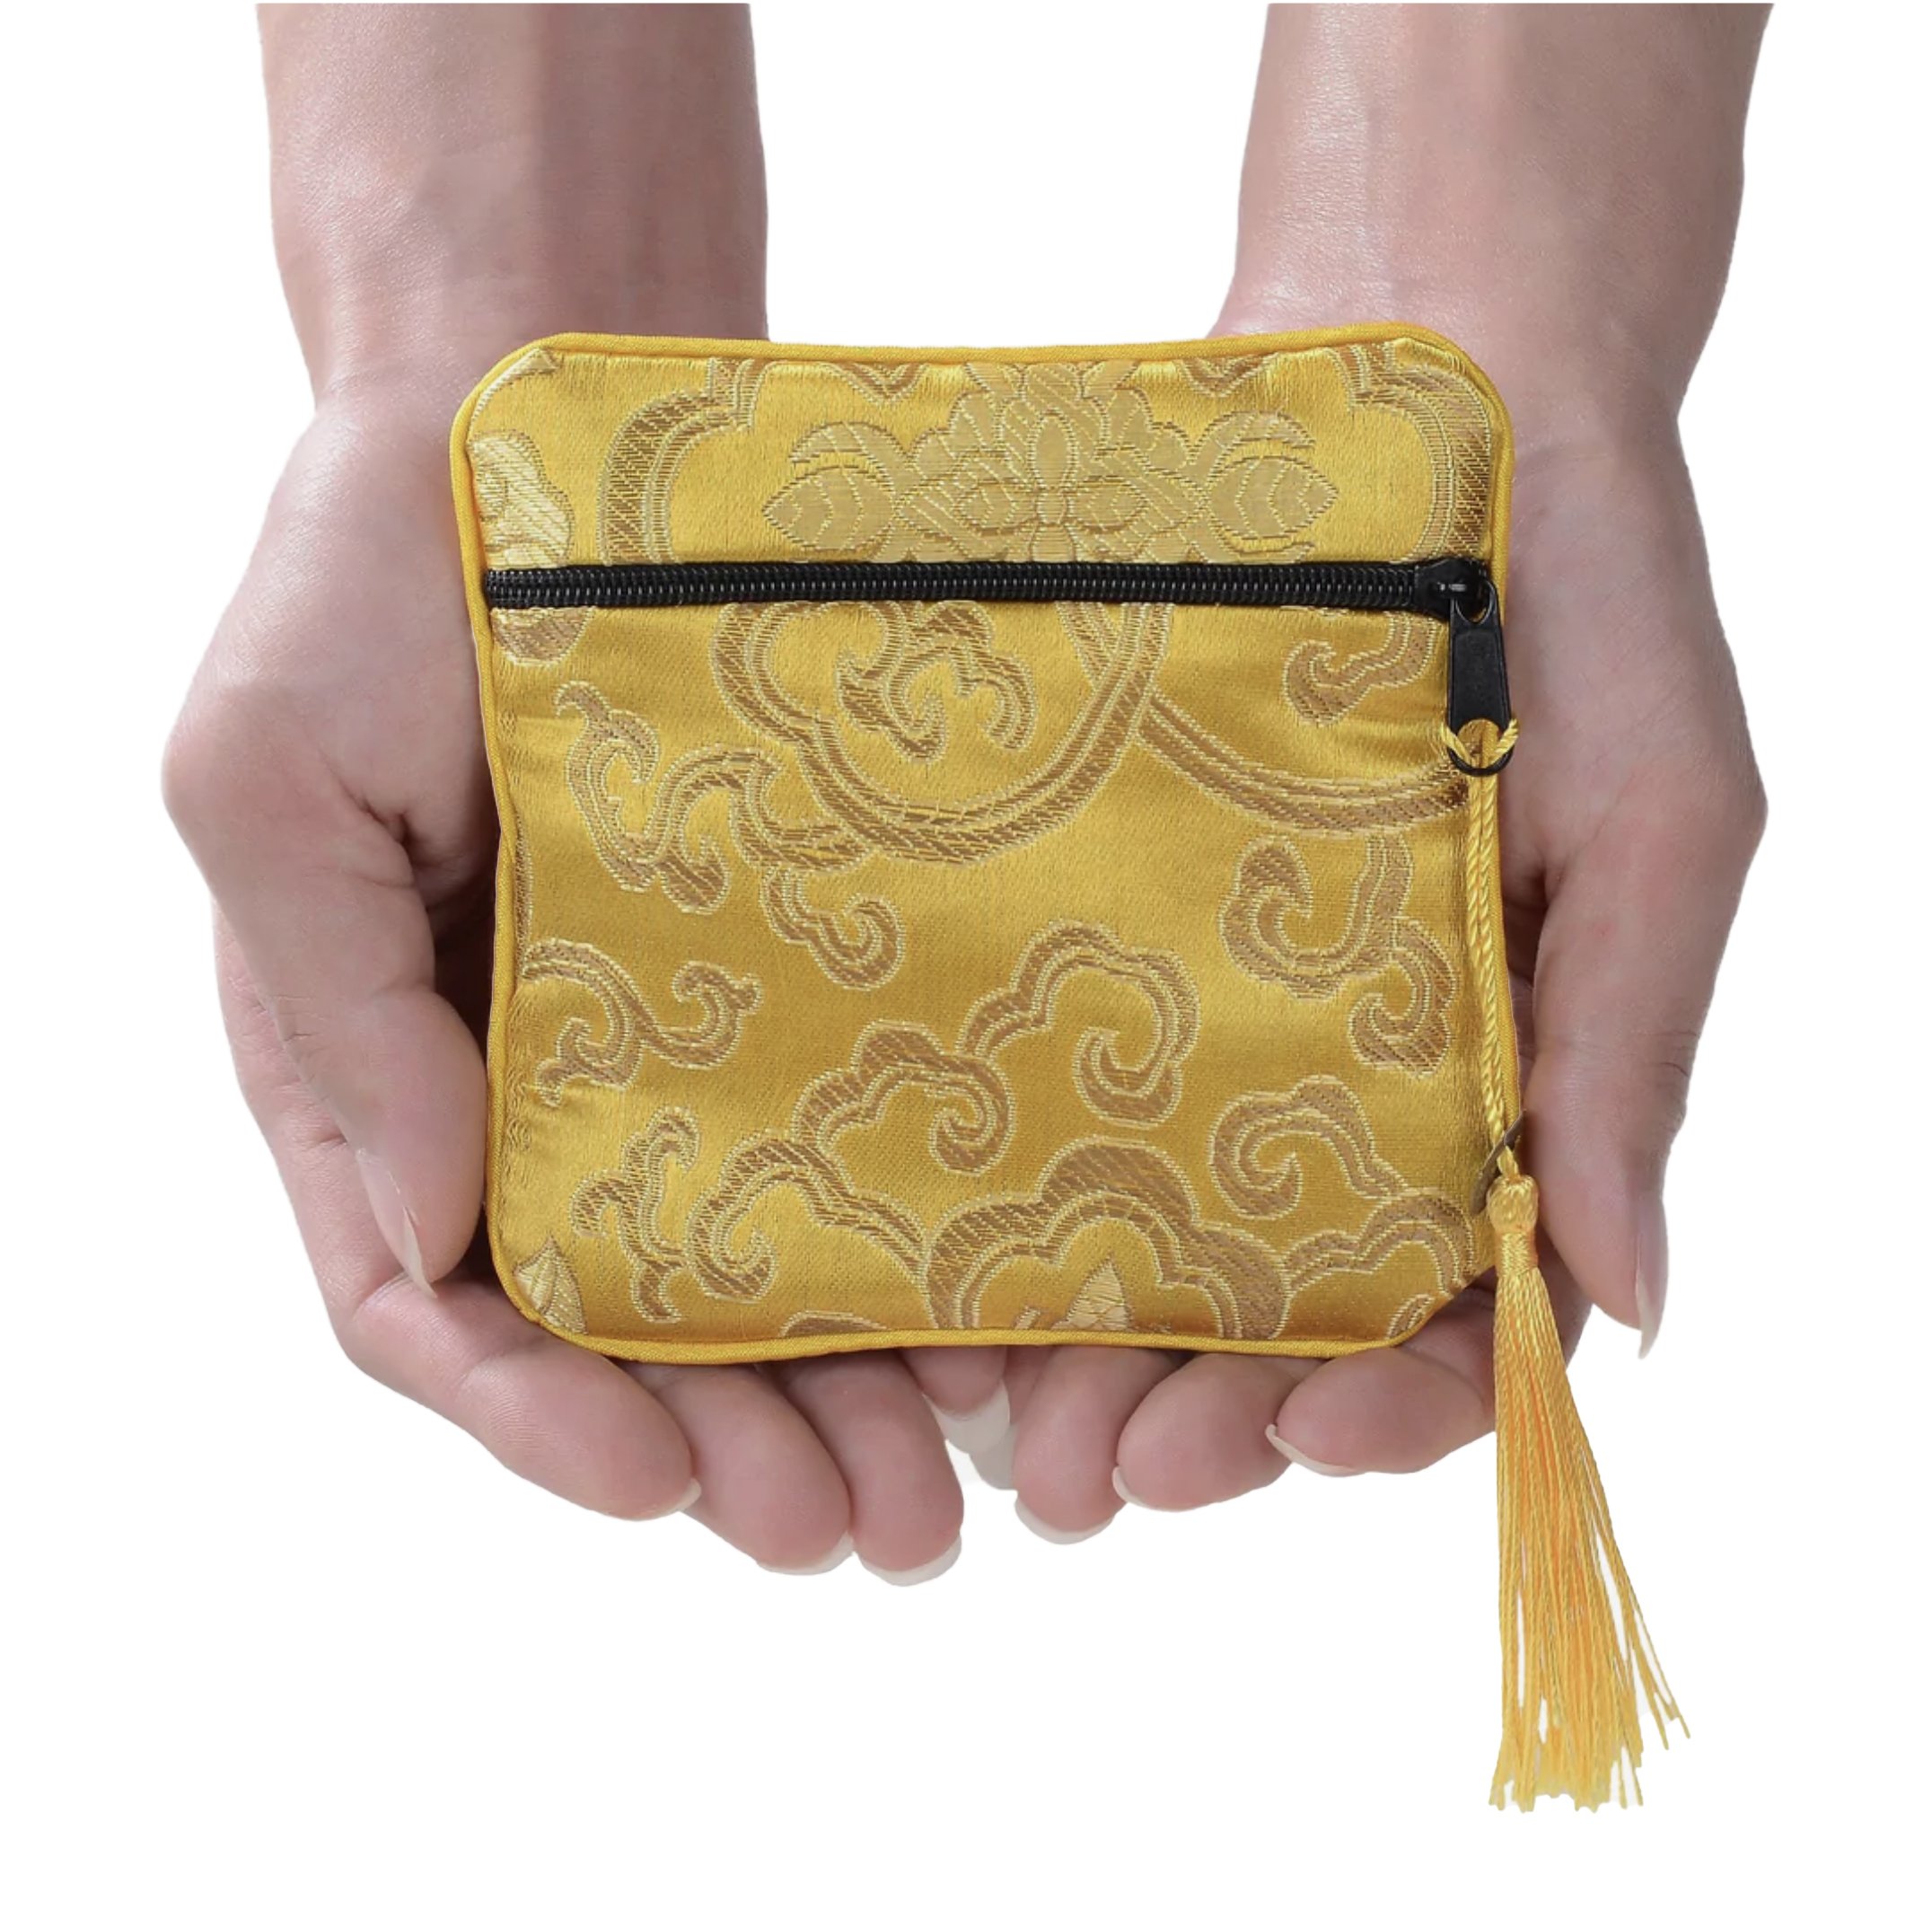 Yellow Silk Jewelry Pouch with Zipper | Rare Earth Gallery